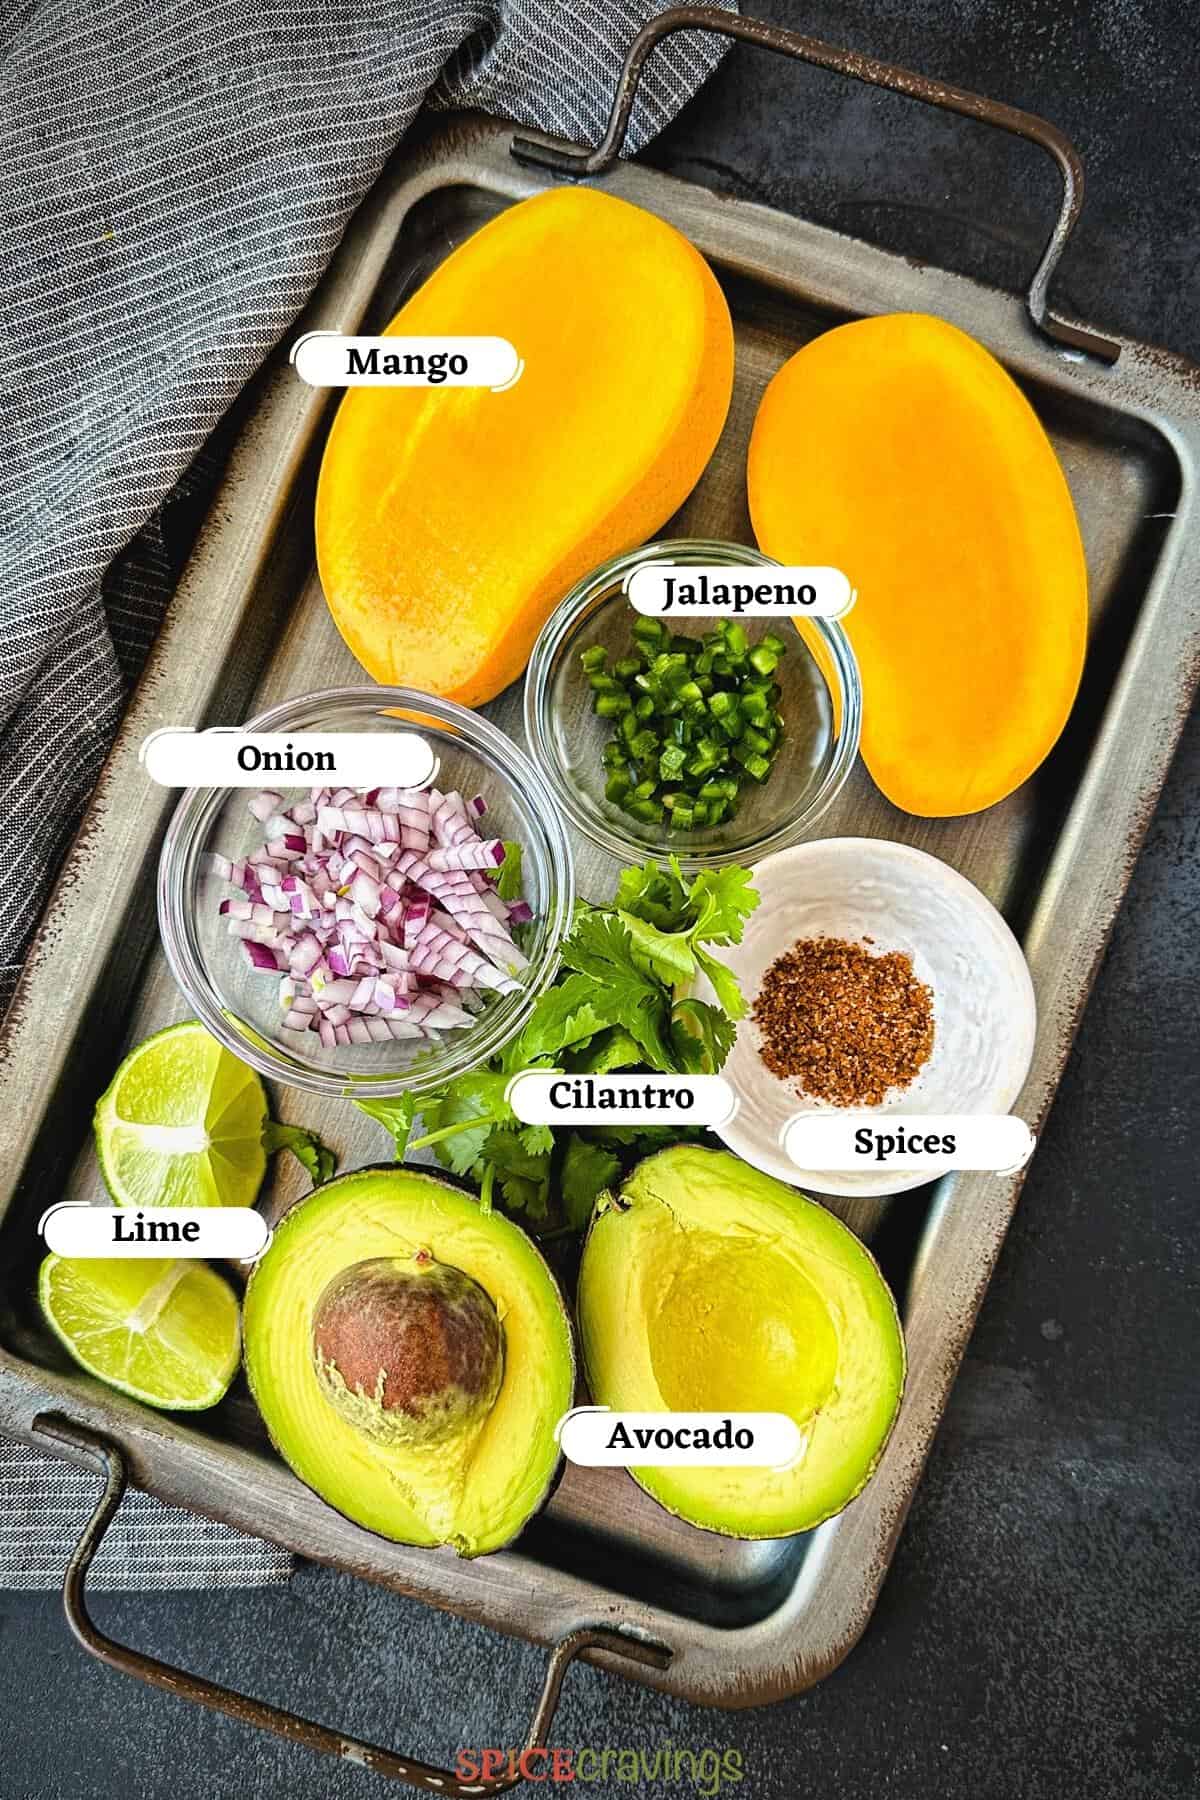 Mango, avocado, onion, spices among other ingredients on grey tray